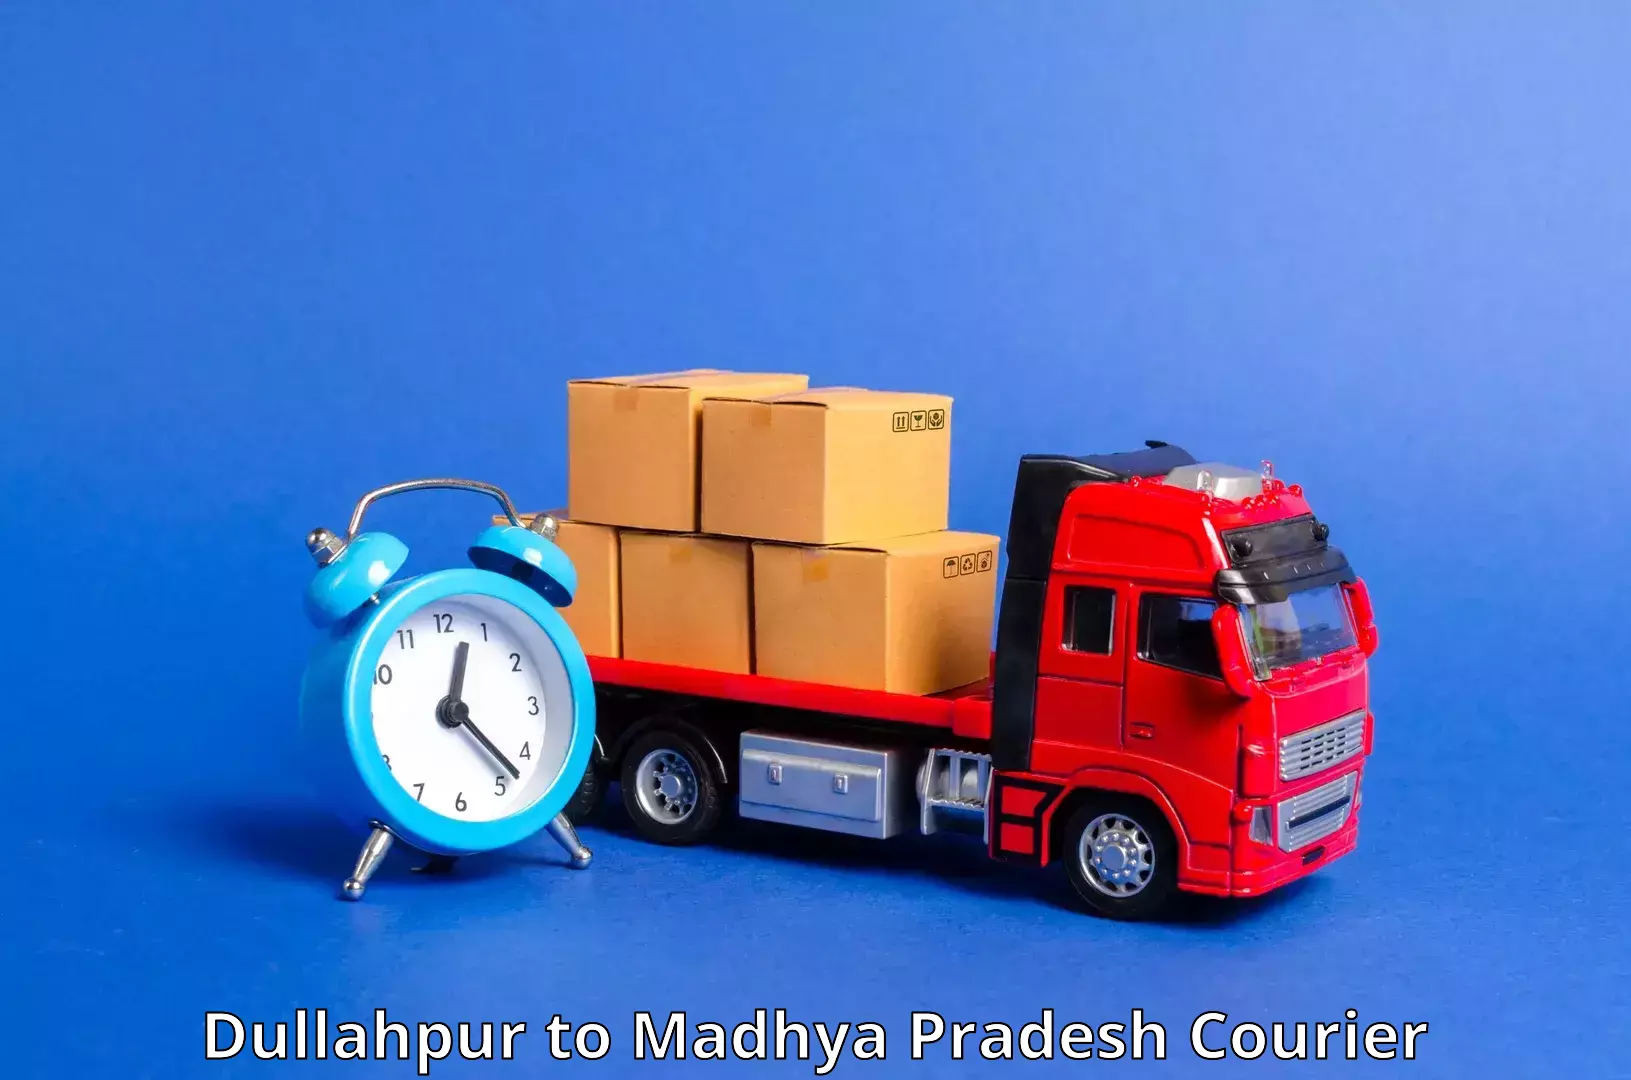 High-speed parcel service Dullahpur to Ratlam